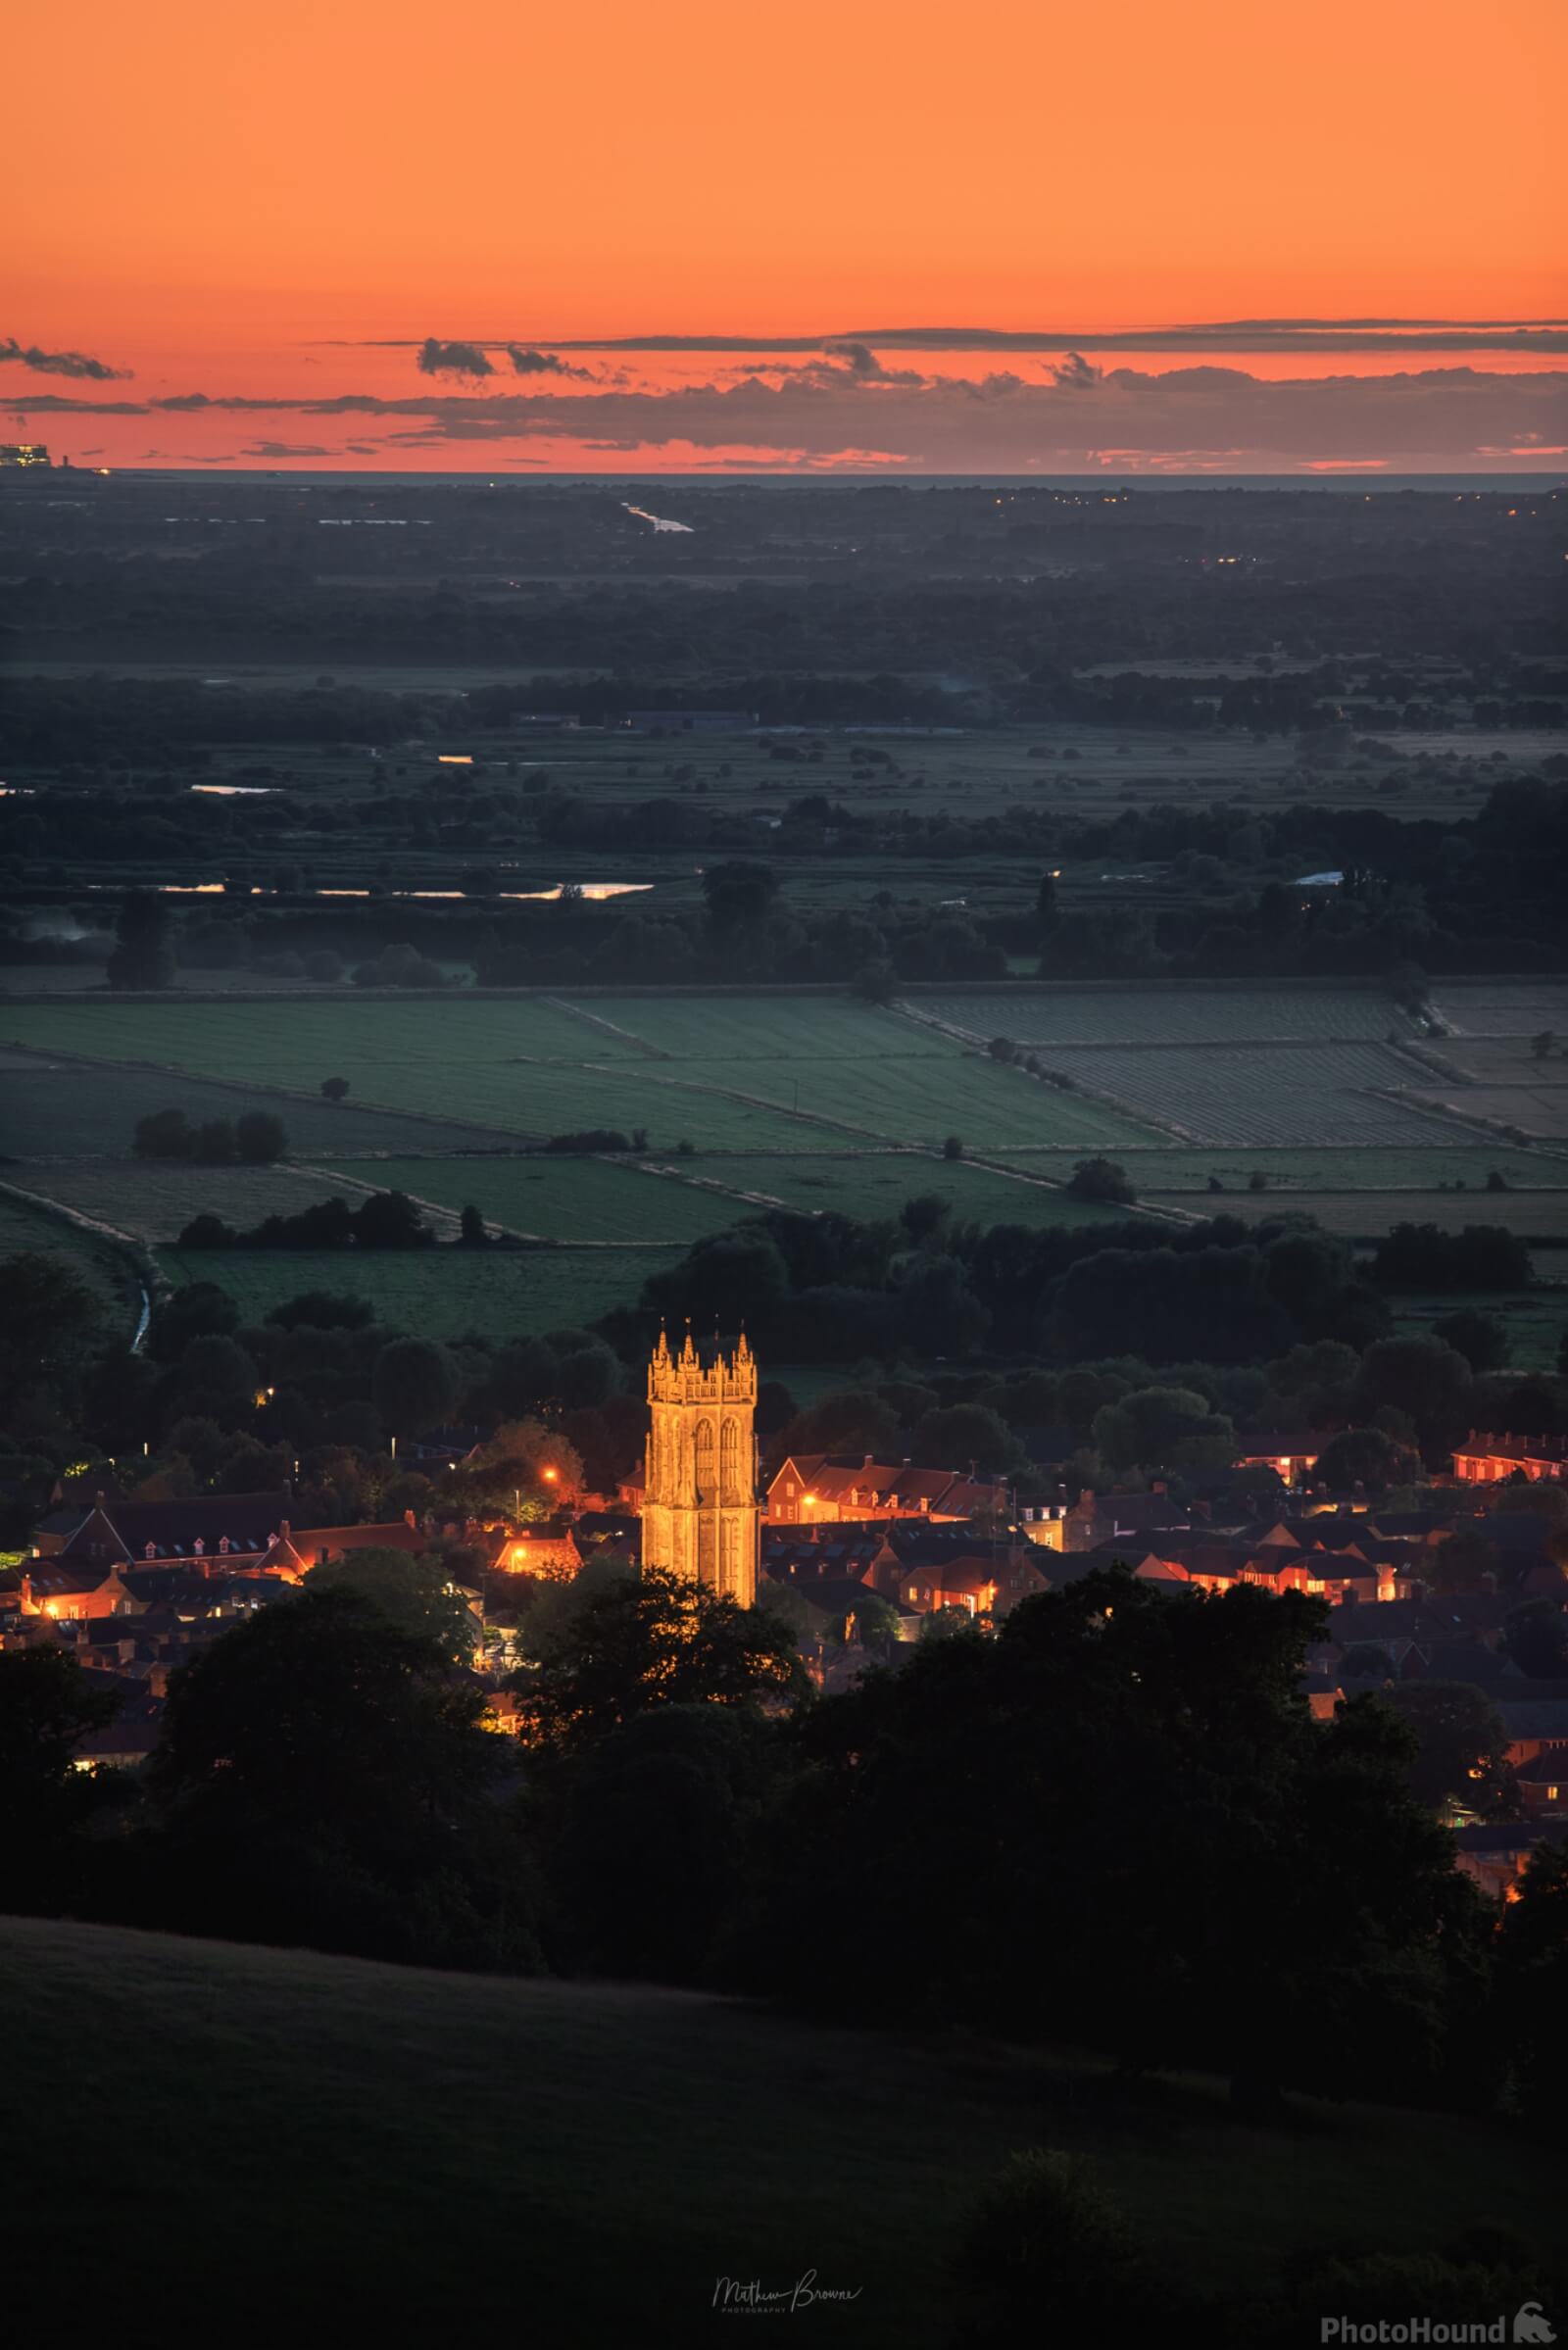 Image of View from Glastonbury Tor by Mathew Browne